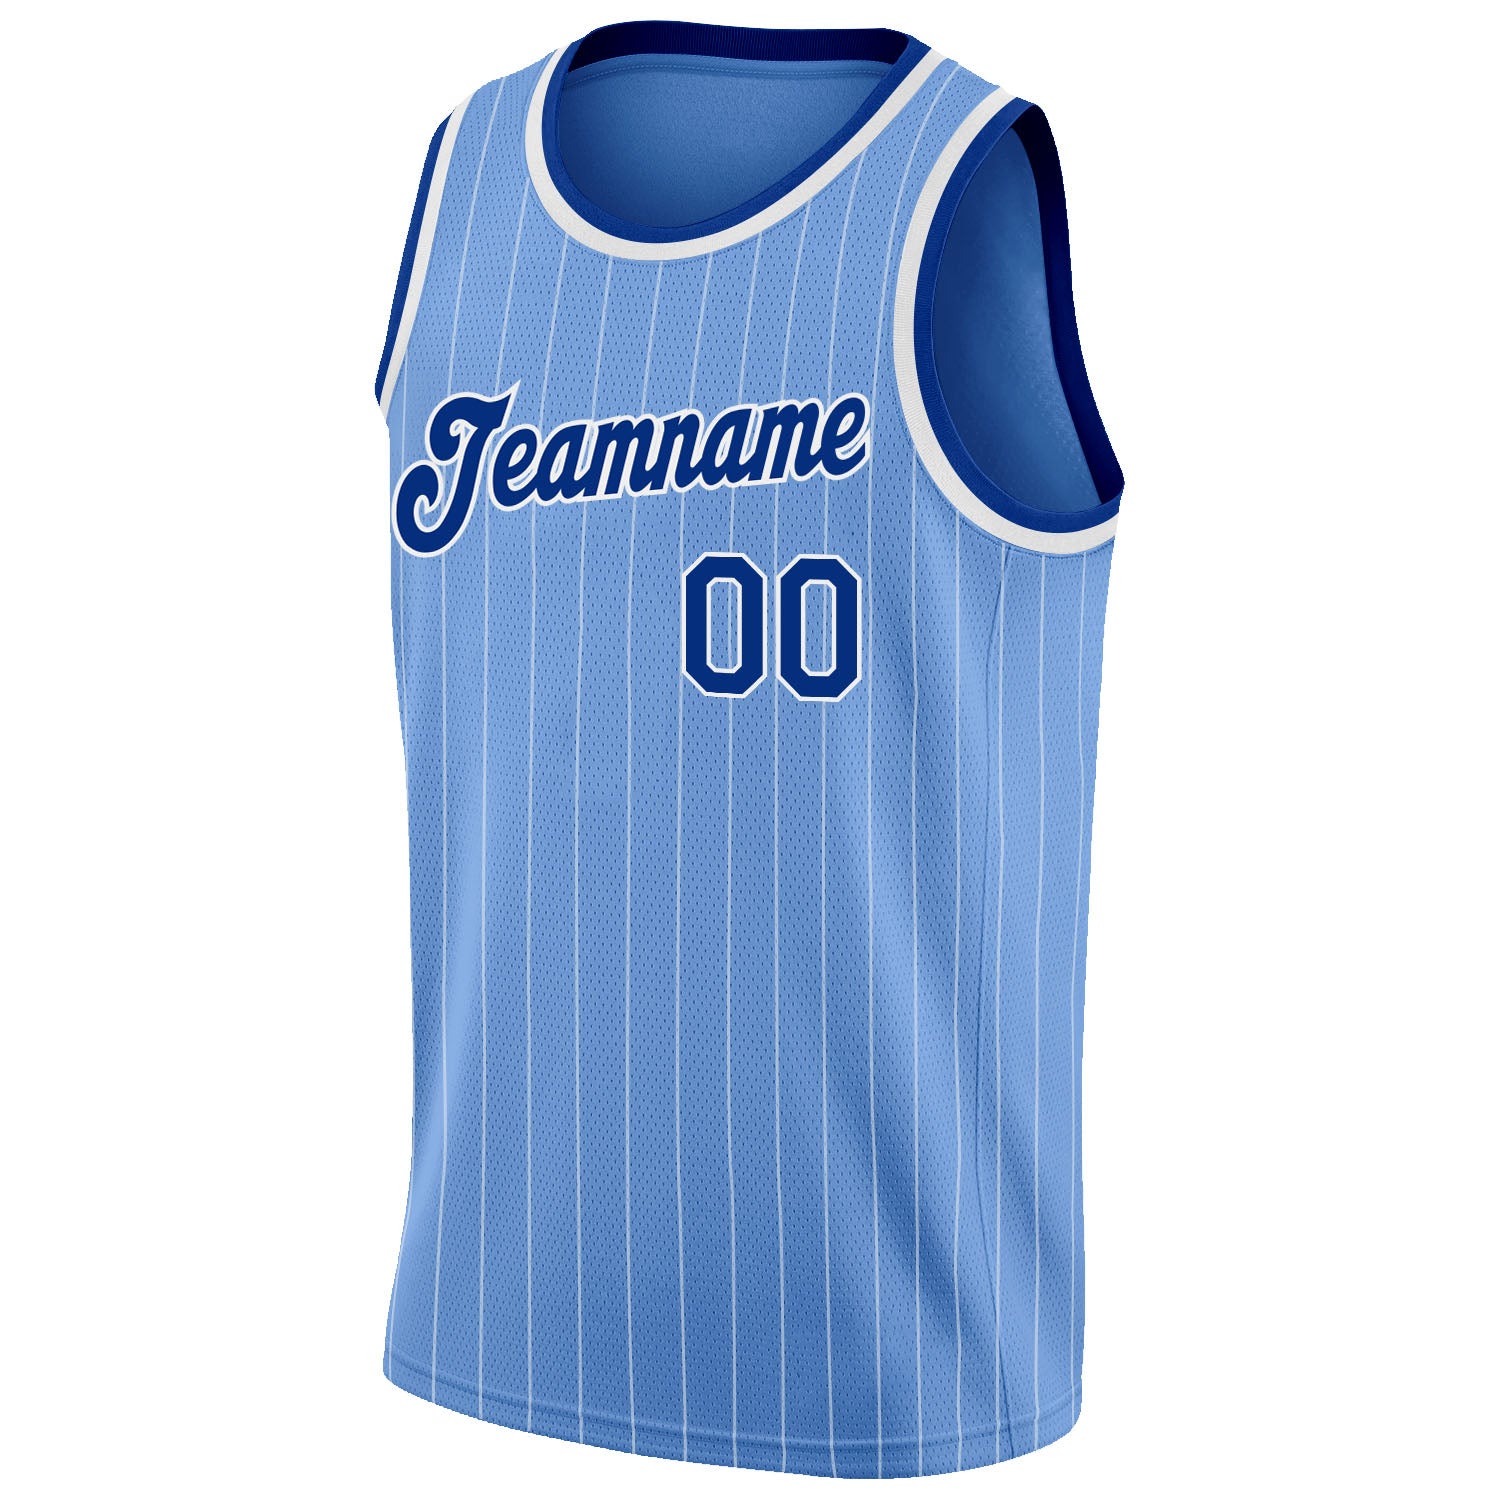 royal blue and white basketball jersey